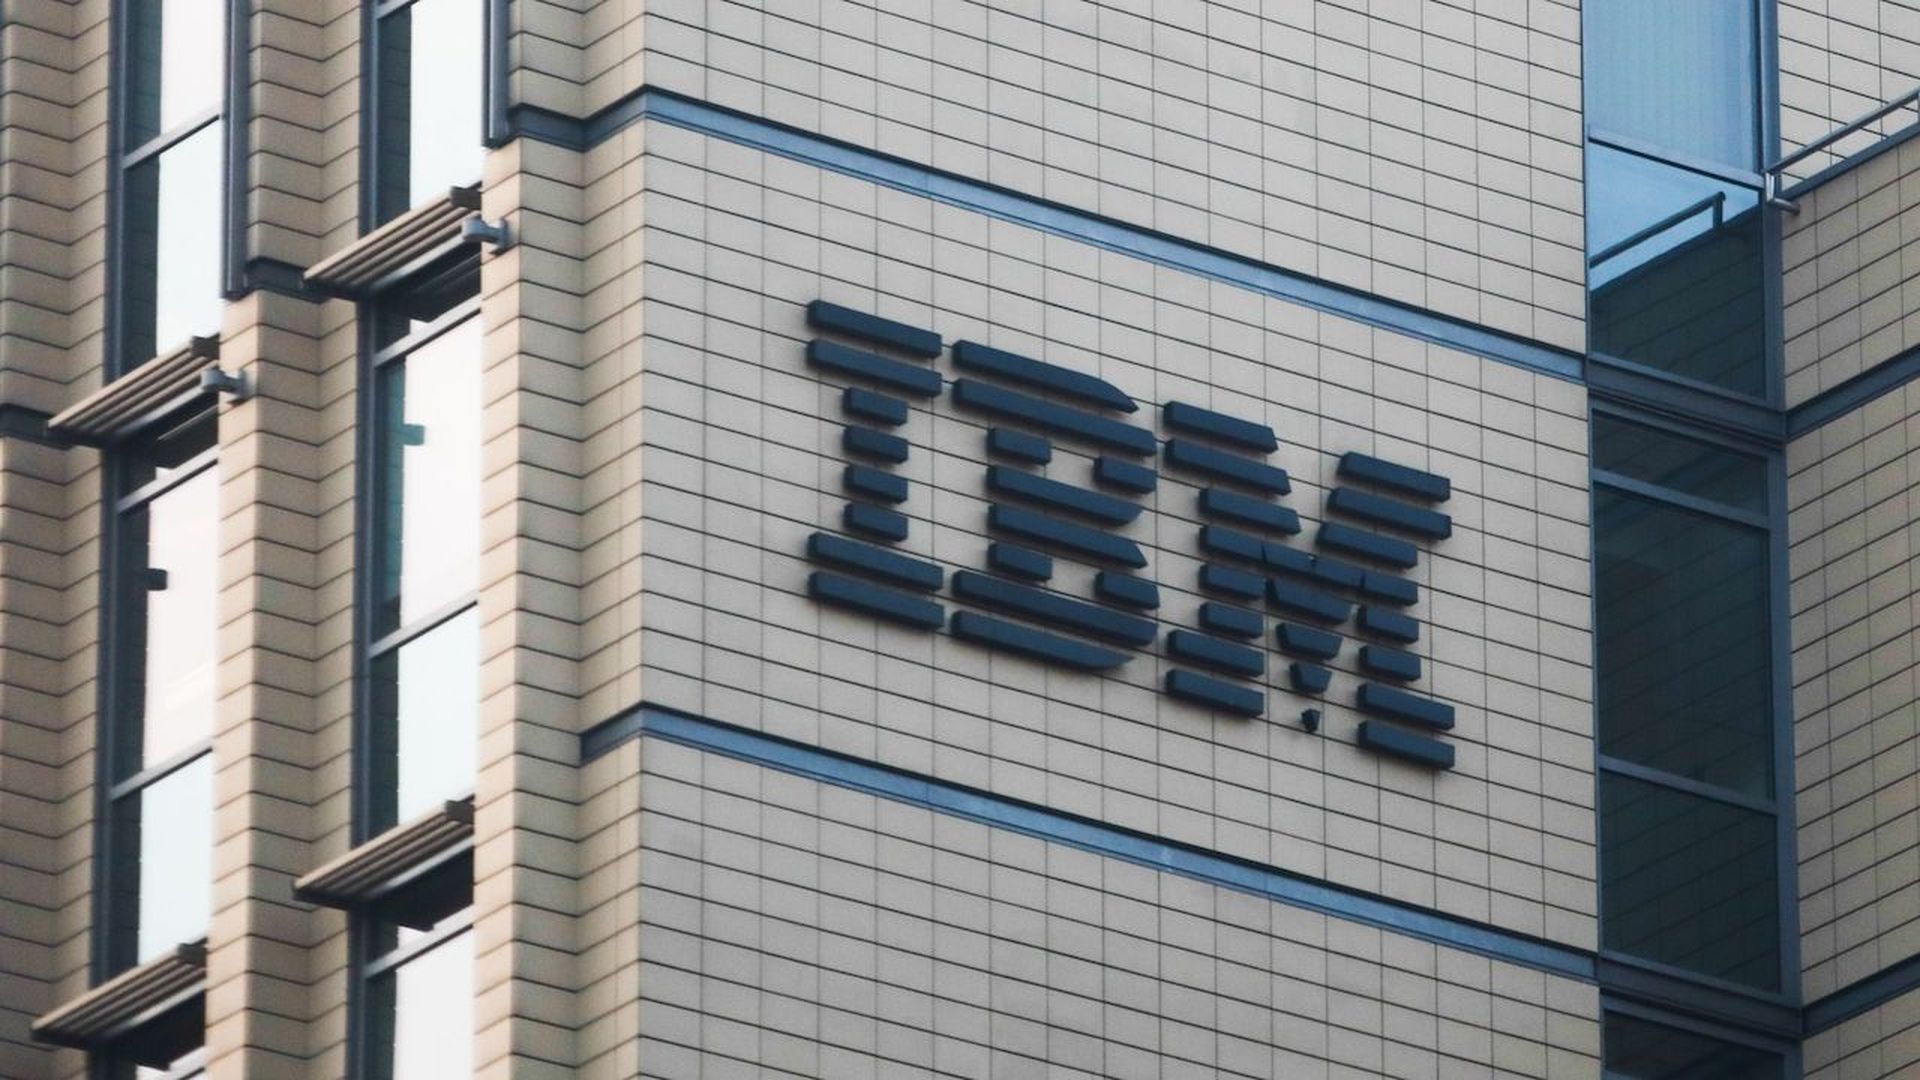 Photo of the IBM logo on a building